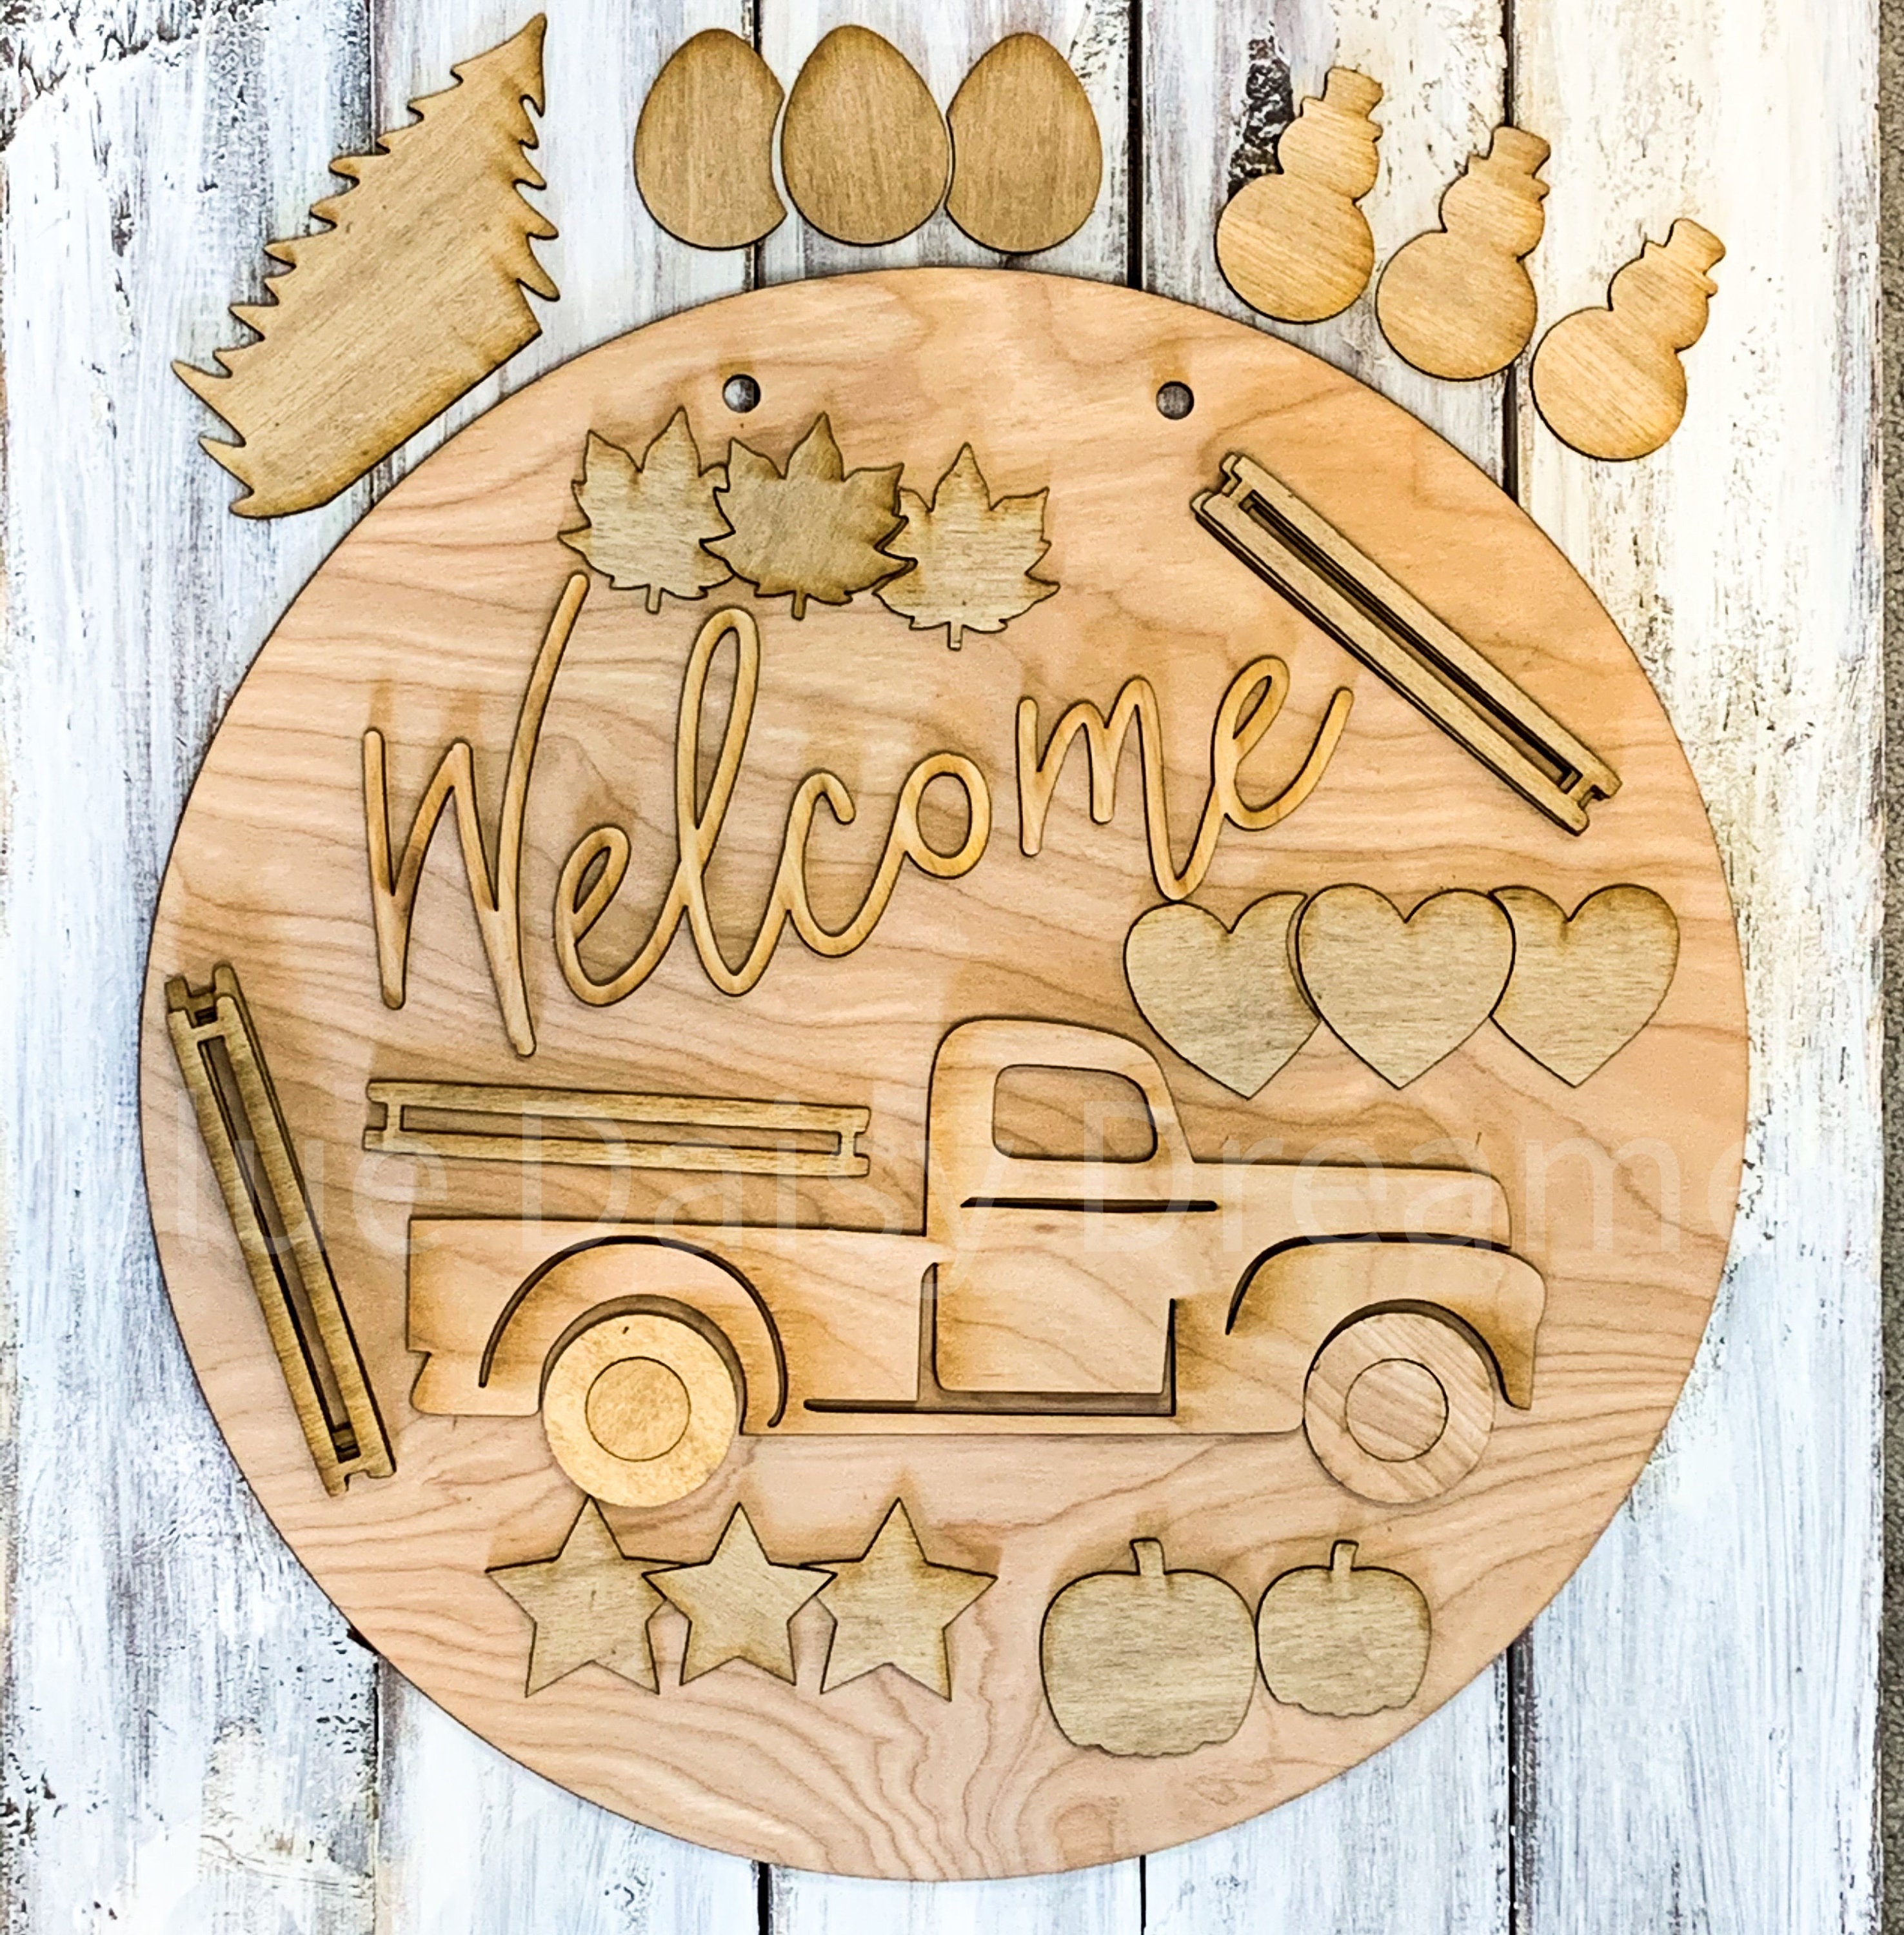 Interchangeable Welcome Sign DIY - Slay At Home Mother